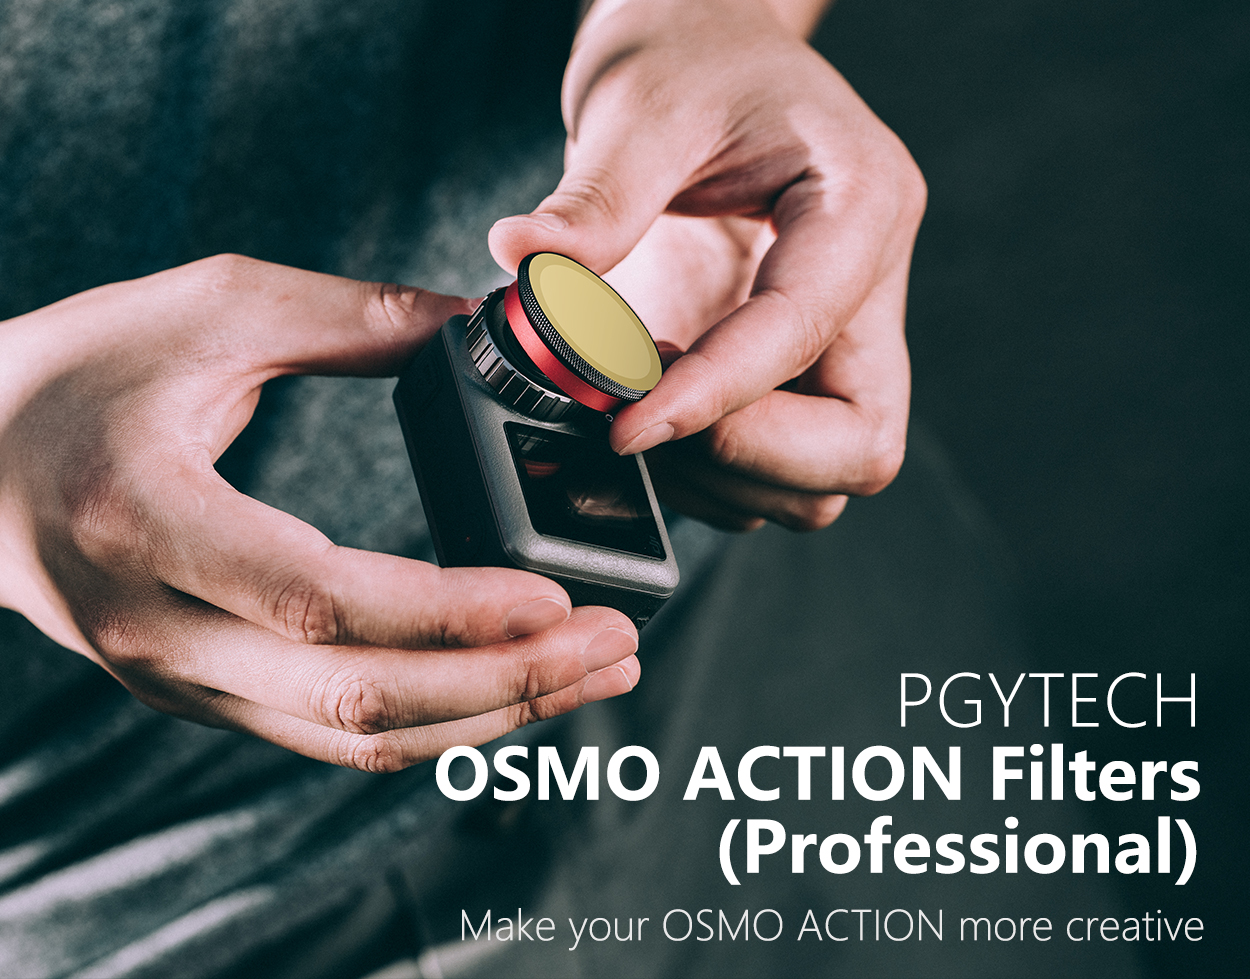 filter-mrc-uv-osmo-action-professional-pgytech-gon